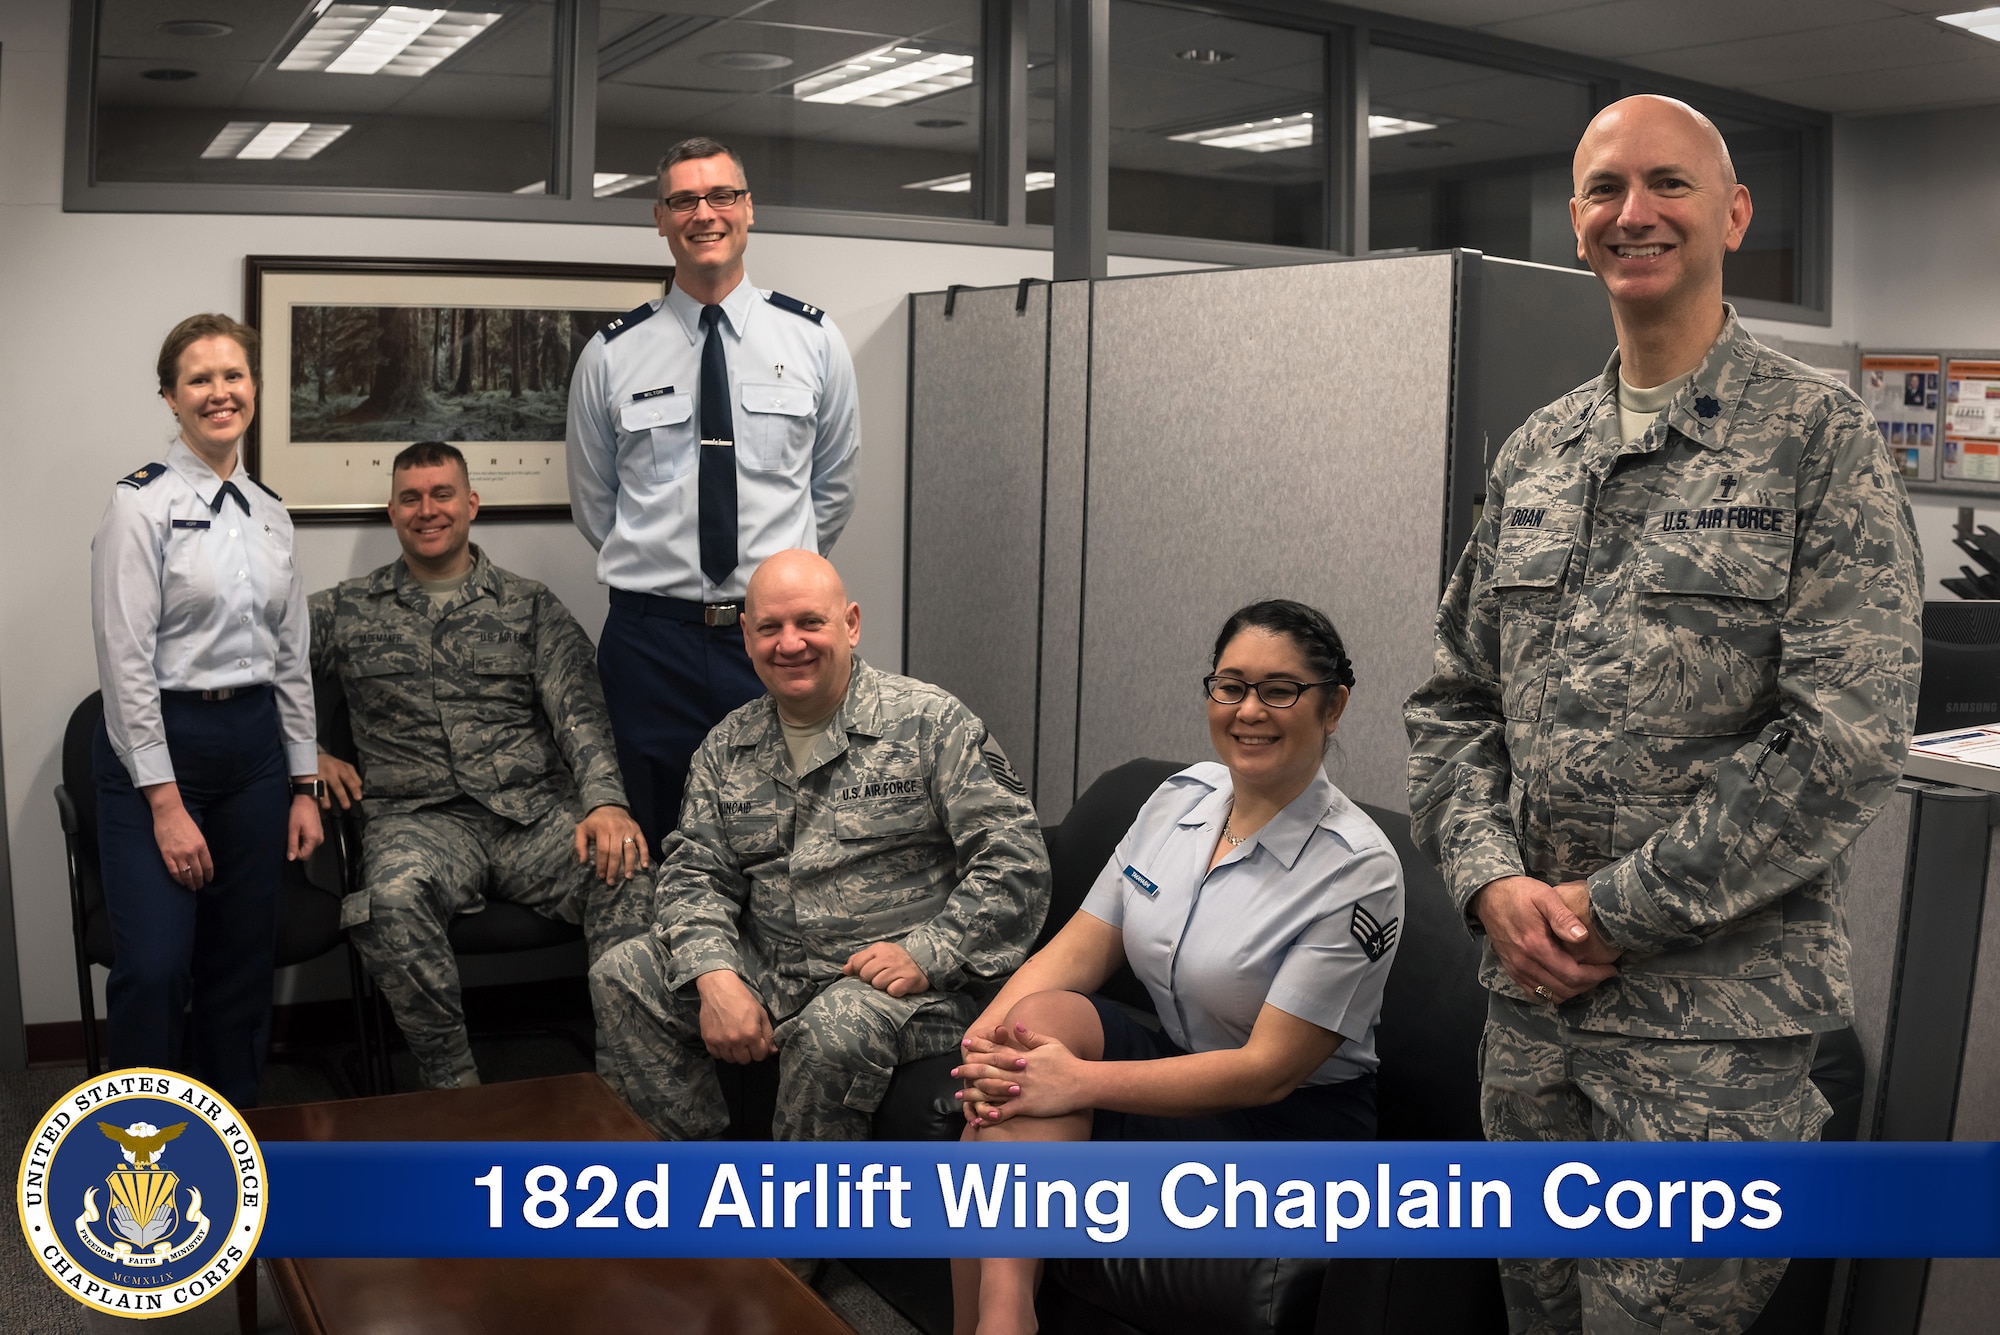 U.S. Air Force chaplains and chaplain assistants with the 182nd Airlift Wing, Illinois Air National Guard, pose for a group photo in Peoria, Ill., April 8, 2018.